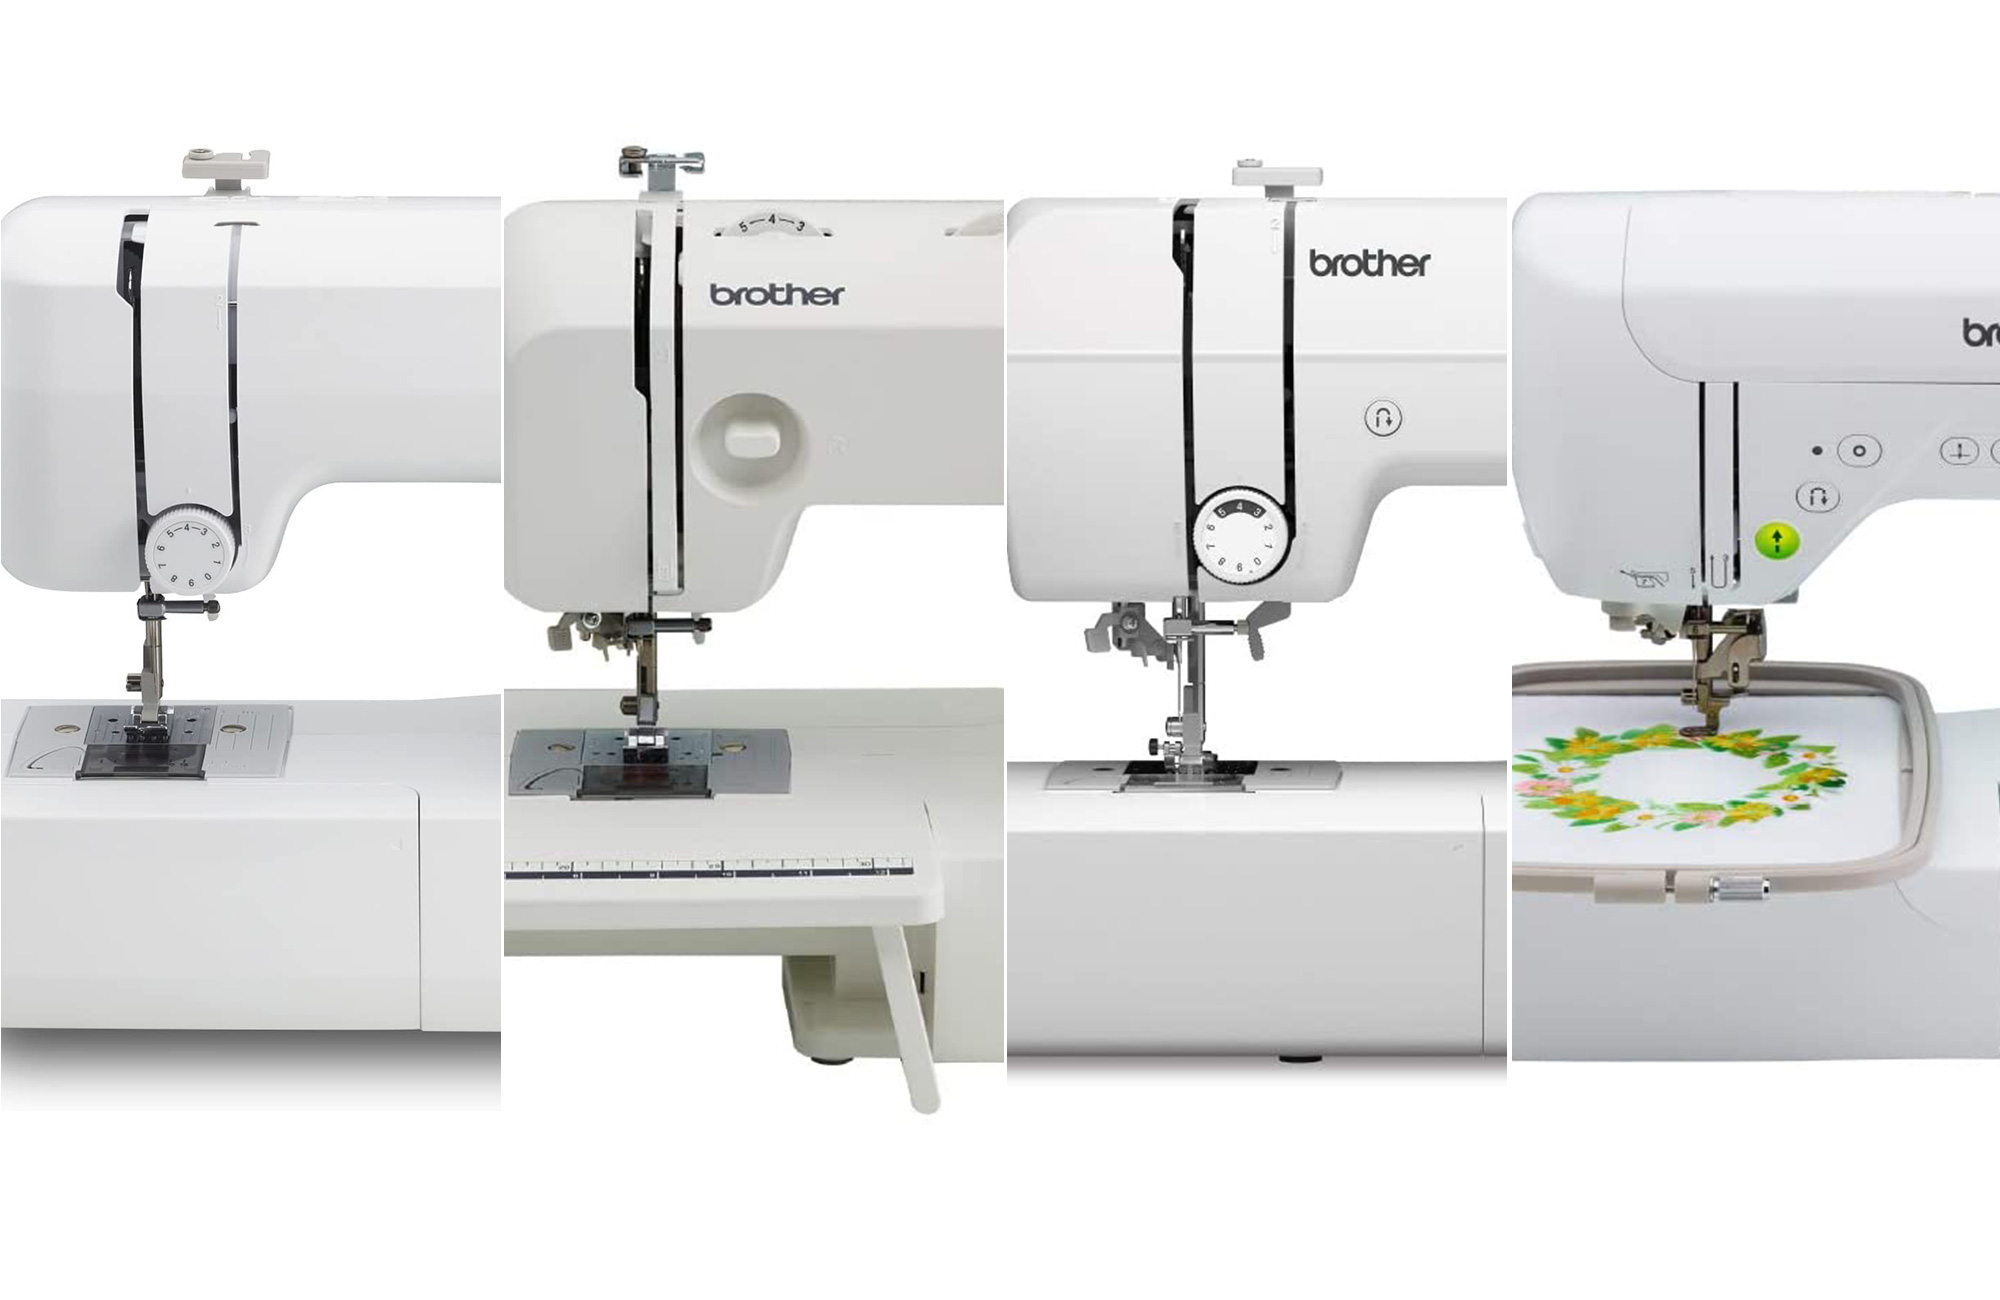 brother xr3774 sewing machines｜TikTok Search